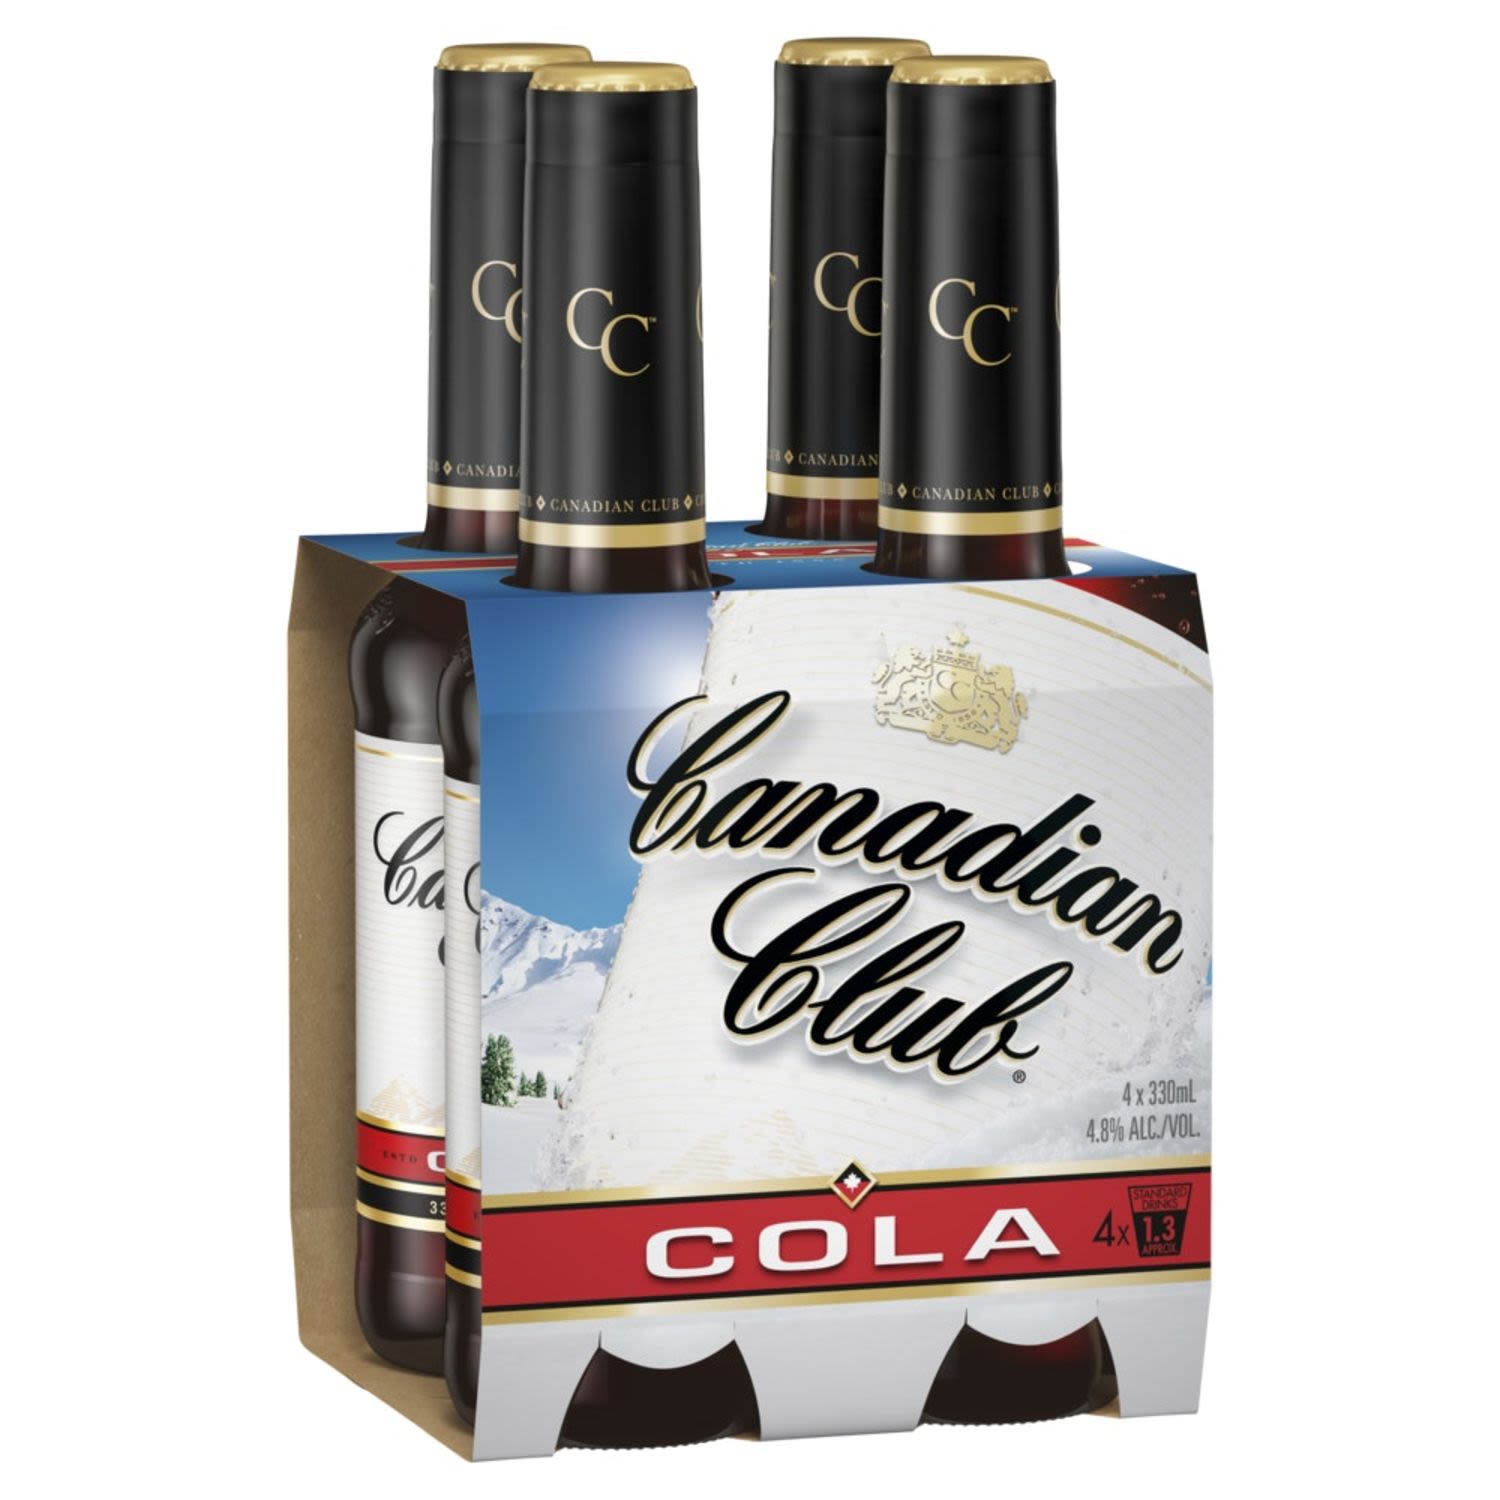 Canadian Club & Cola Bottle 330mL 4 Pack